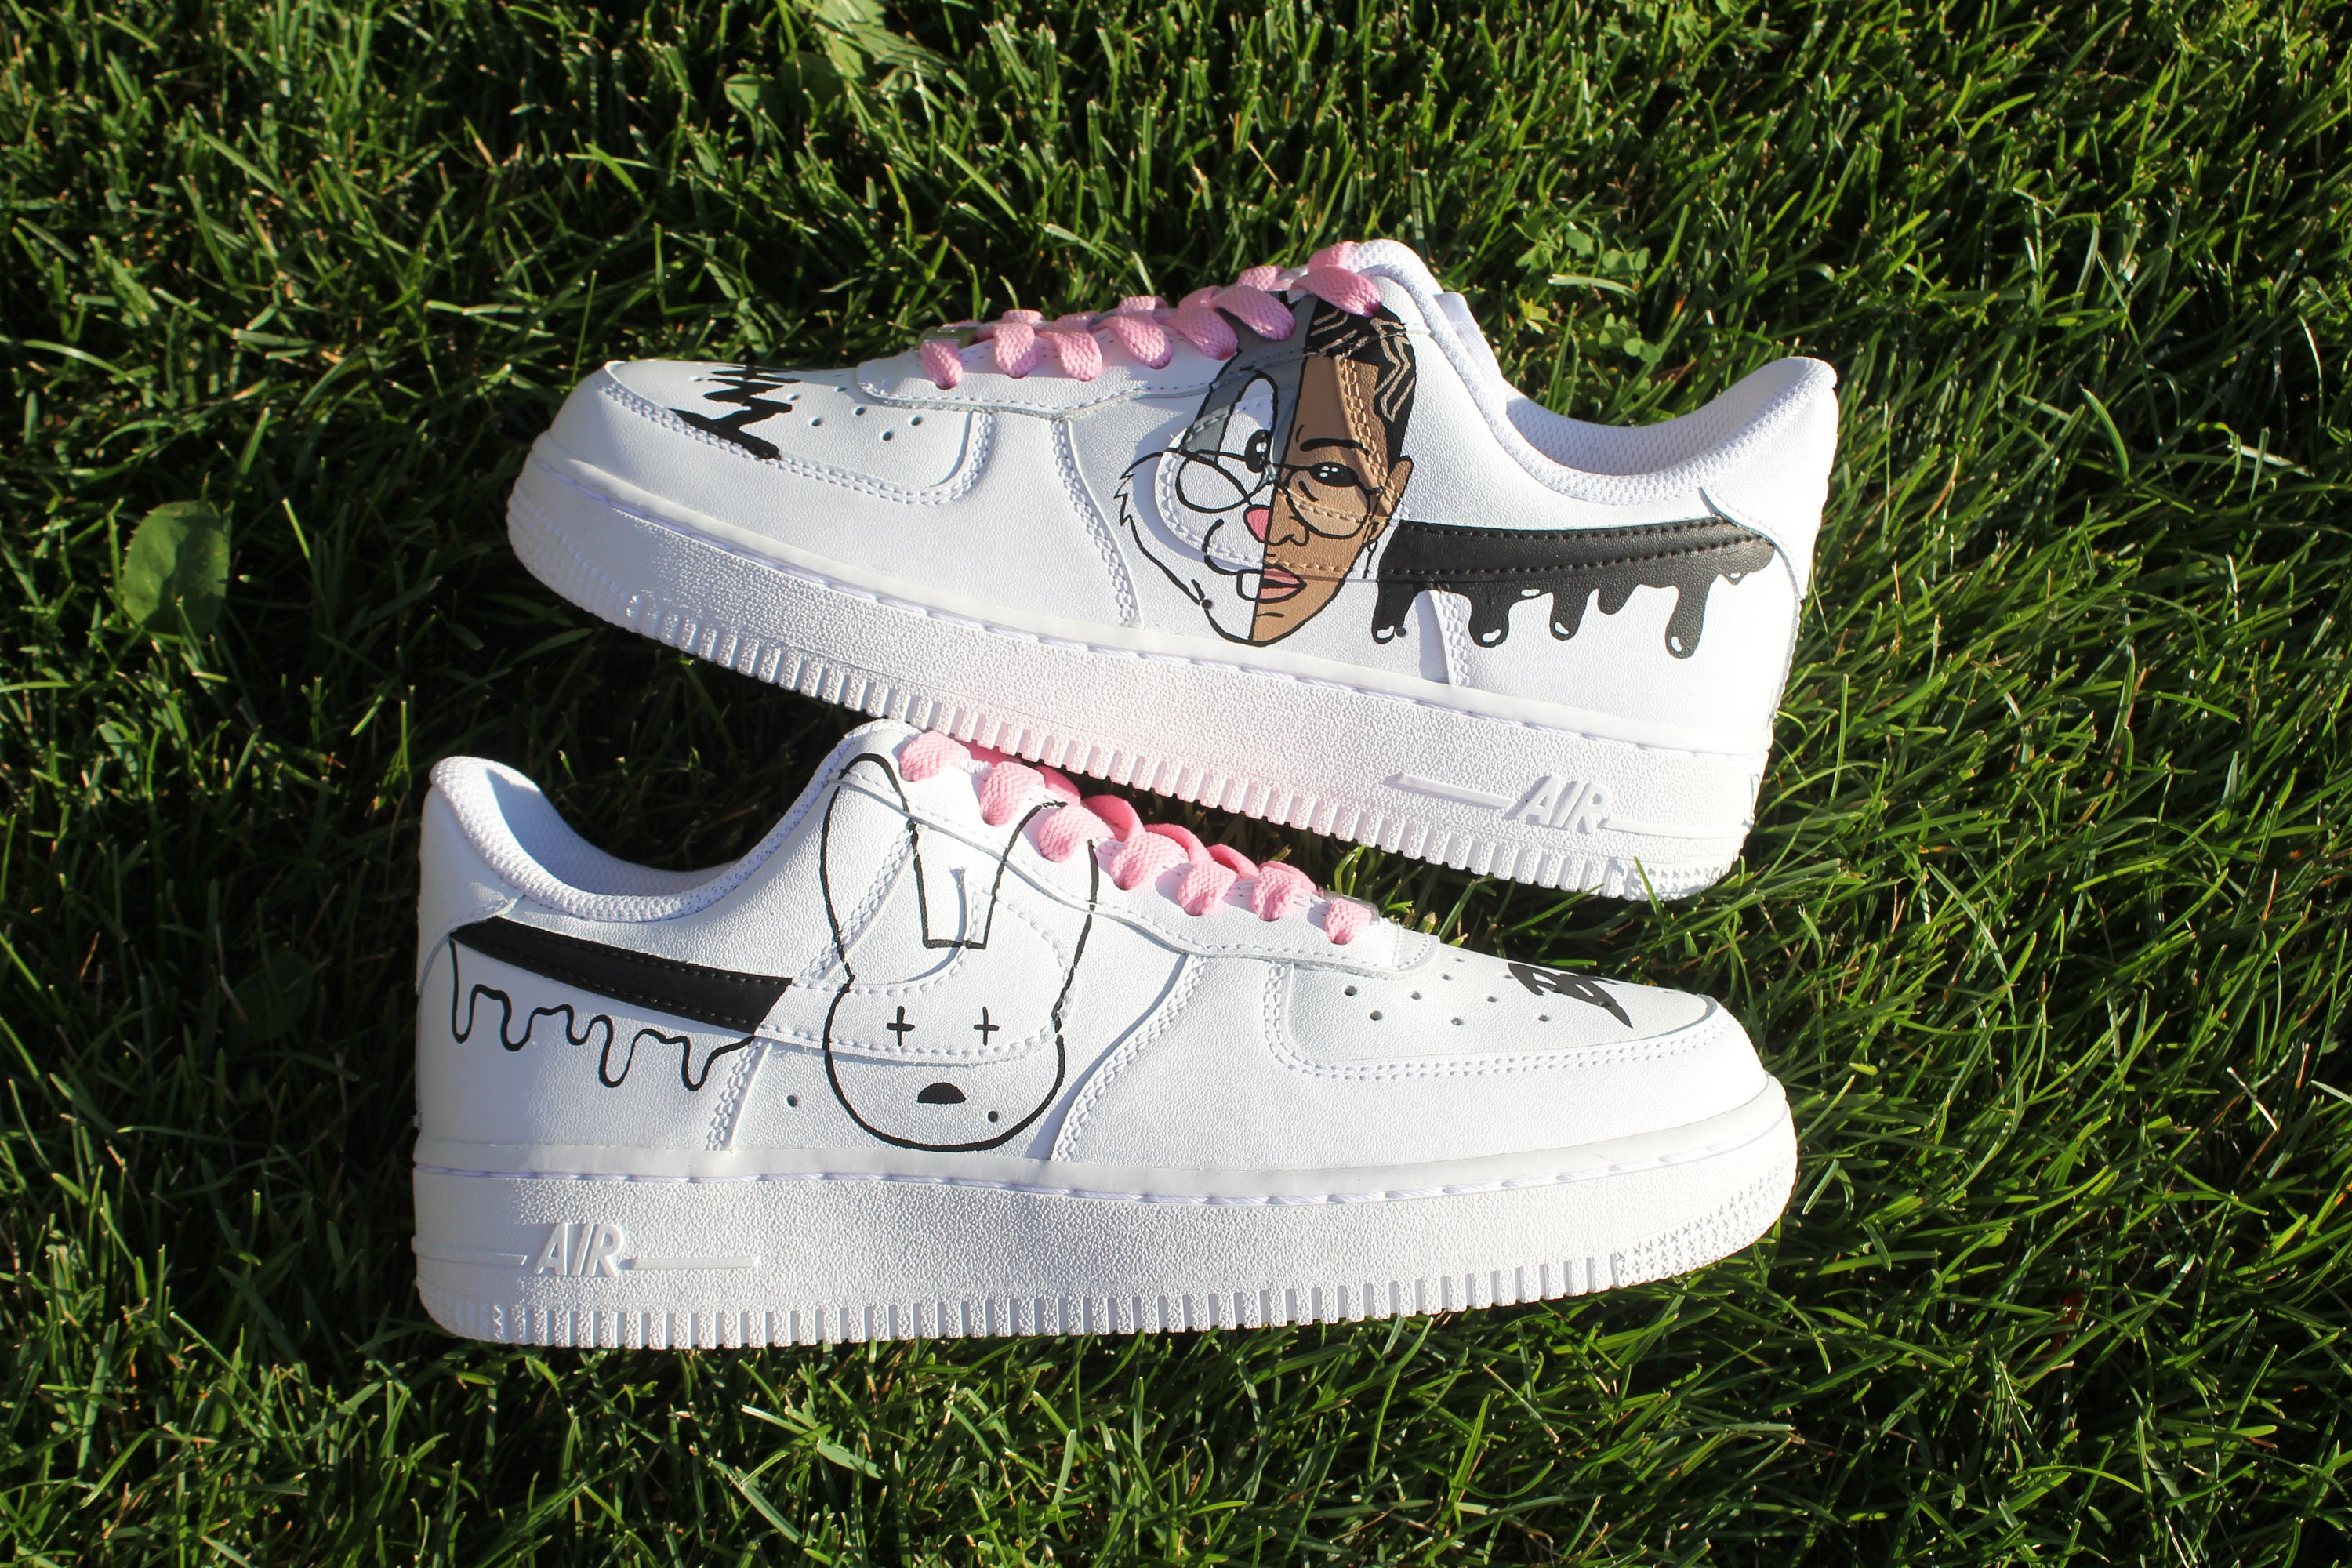 Blue Playboy Bunny Heat Transfer Decal for Air Force 1 Customs. –  theshoesgirl